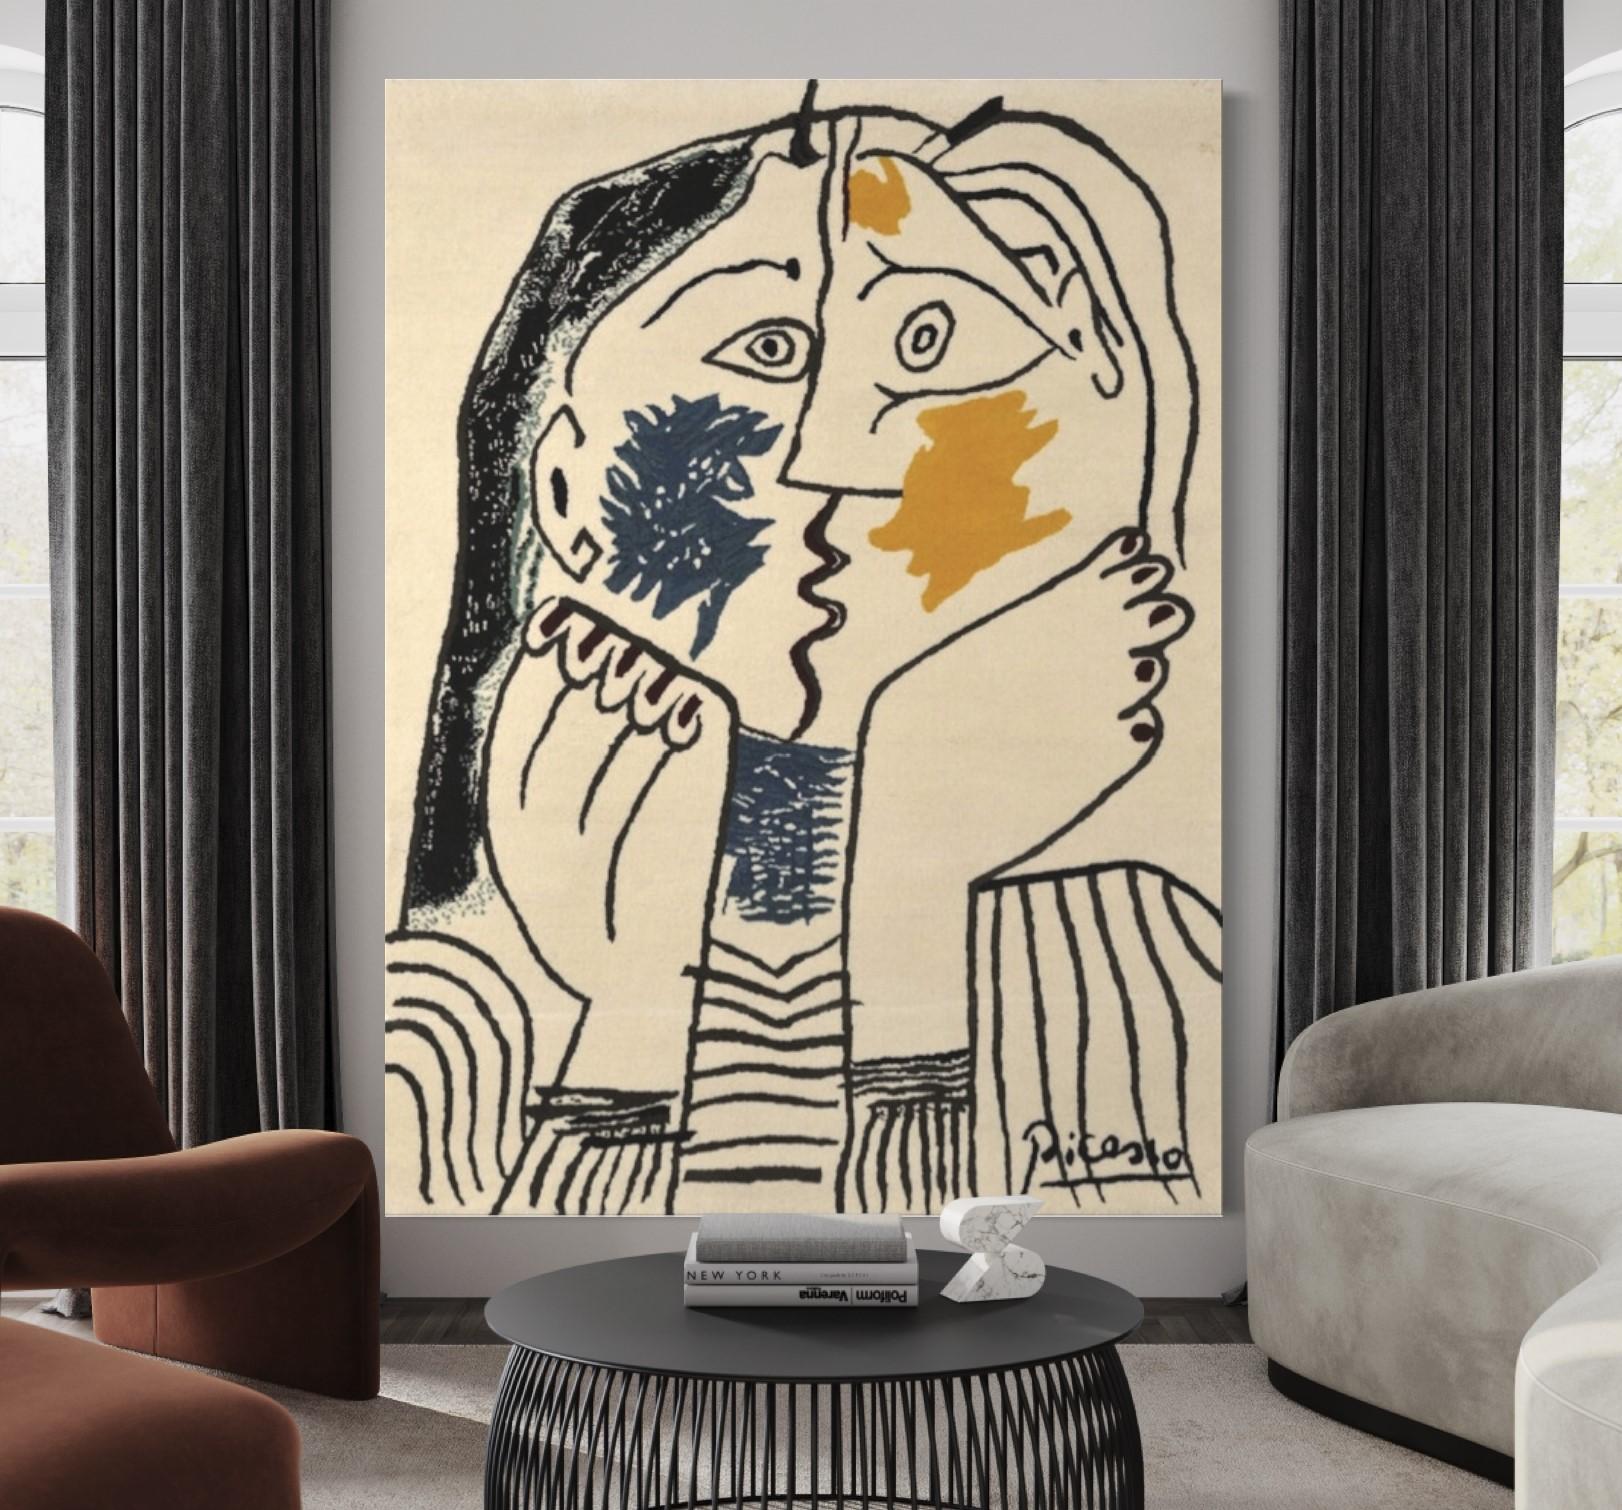 Pablo Picasso, Le Baiser, Wool Tapestry, Limited Edition, Contemporary Art 8